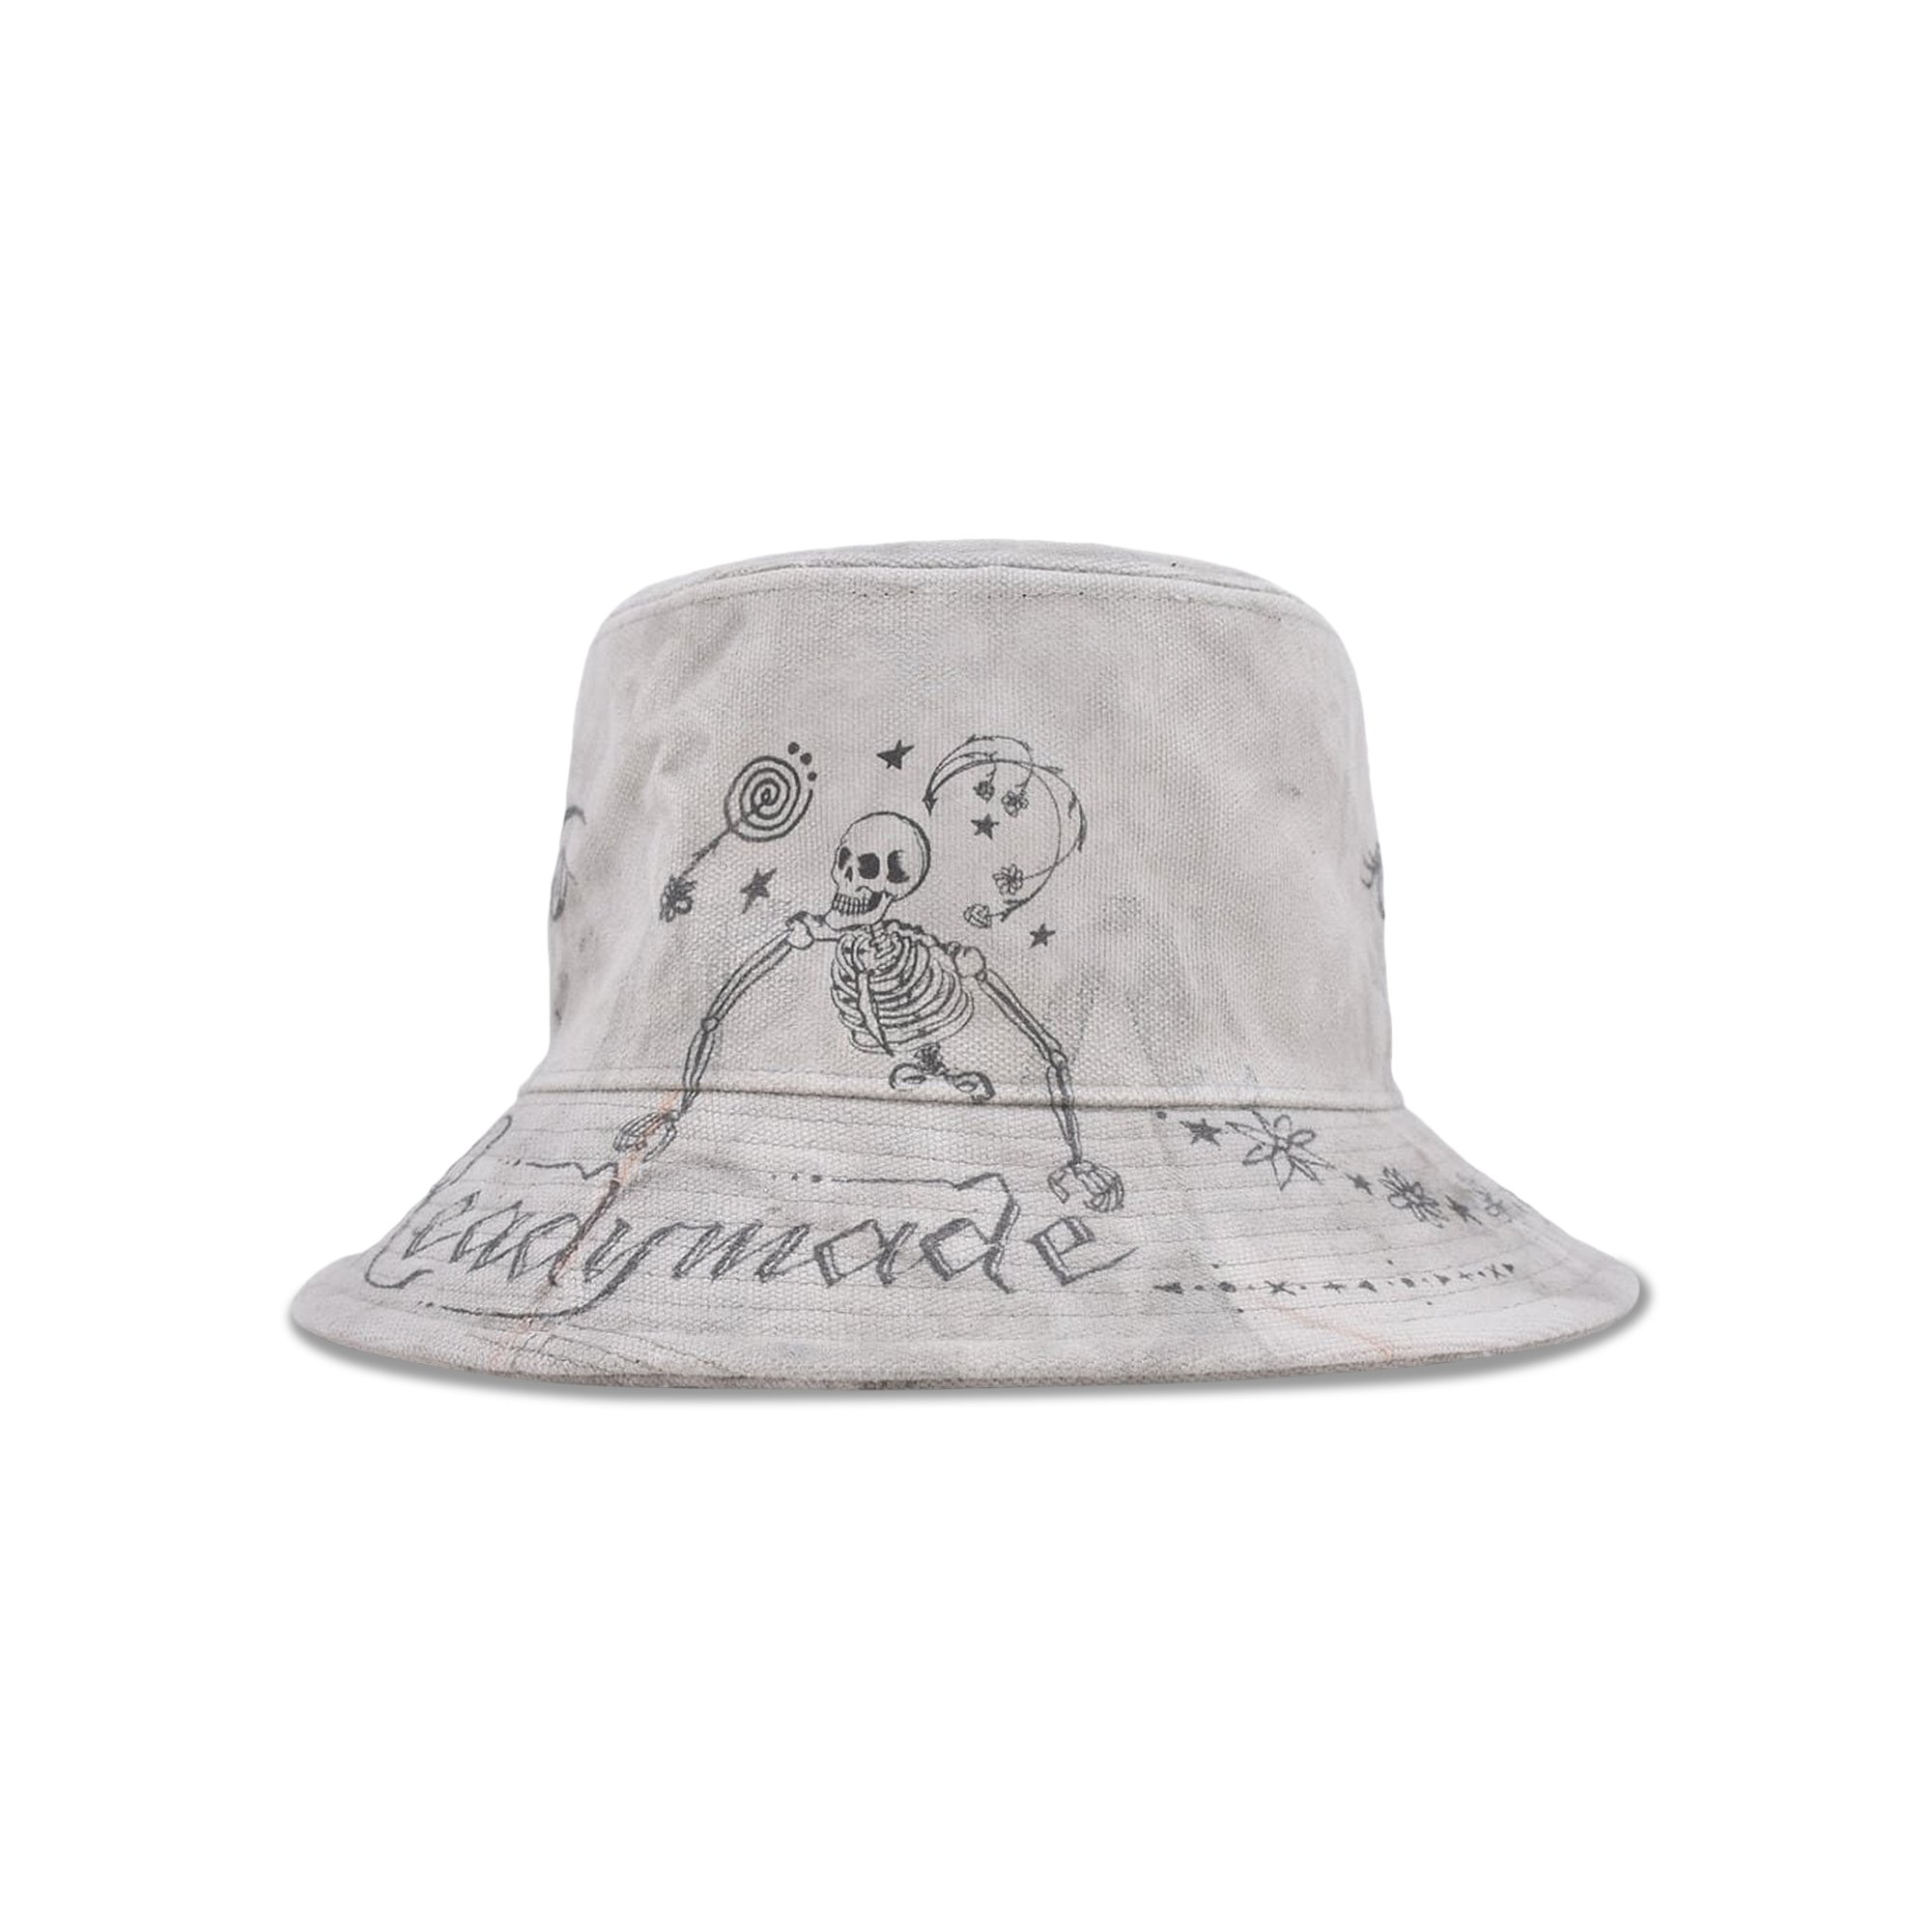 Buy READYMADE x Dr. Woo Bucket Hat 'White' - REDW CO WH 00 00 03 